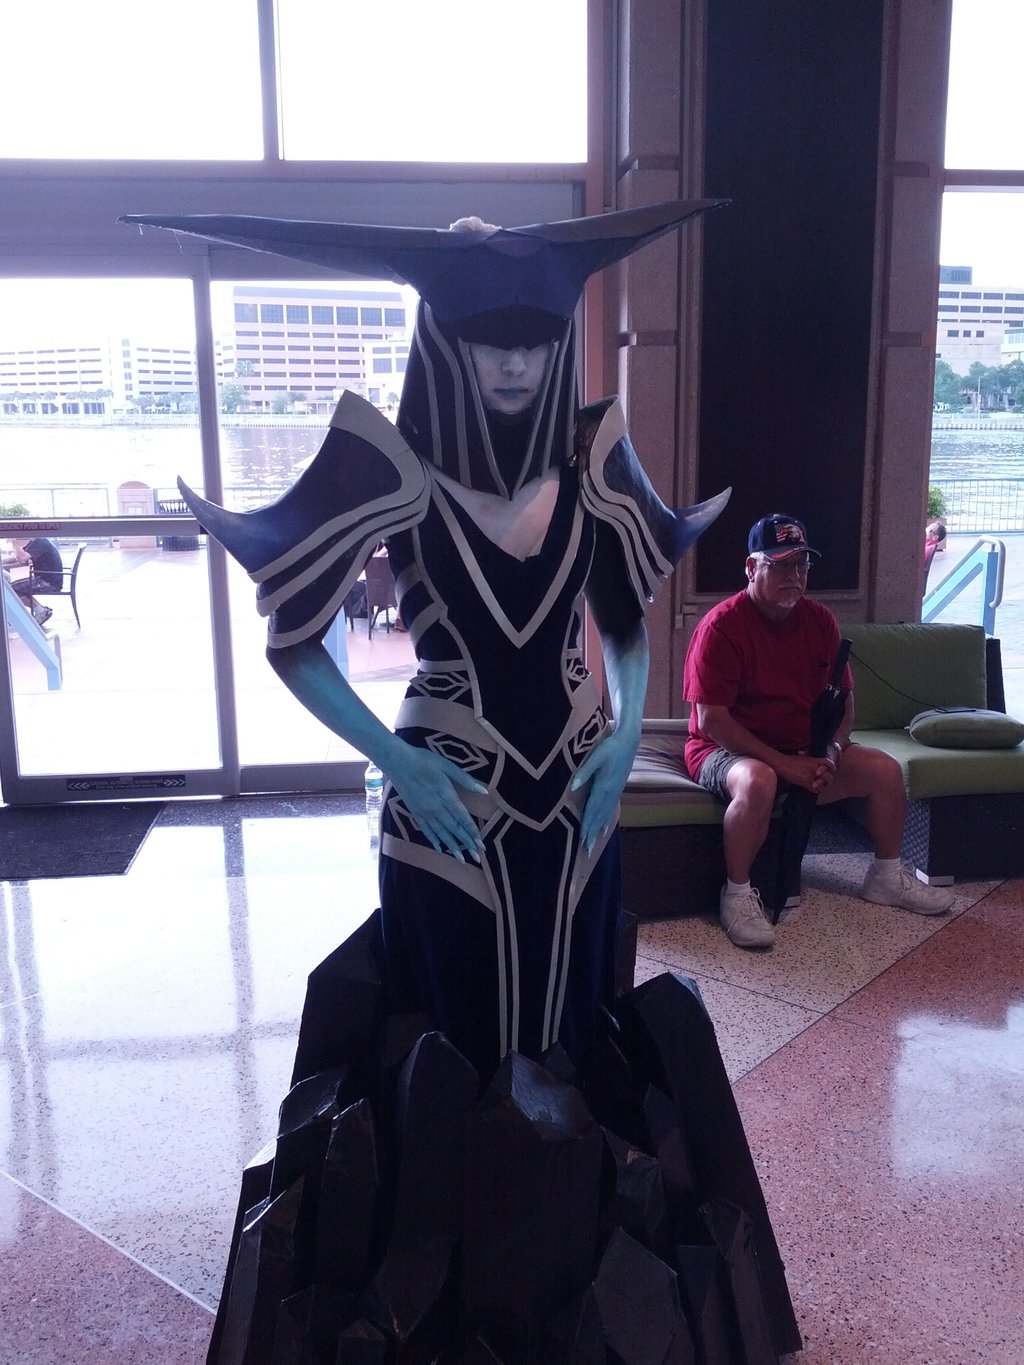 I chose this because it's not only impressive cosplay but hilarious..how does she move, a trolley? Alas the guy behind her was not impressed in the slightest. He's more of a Taric fan.